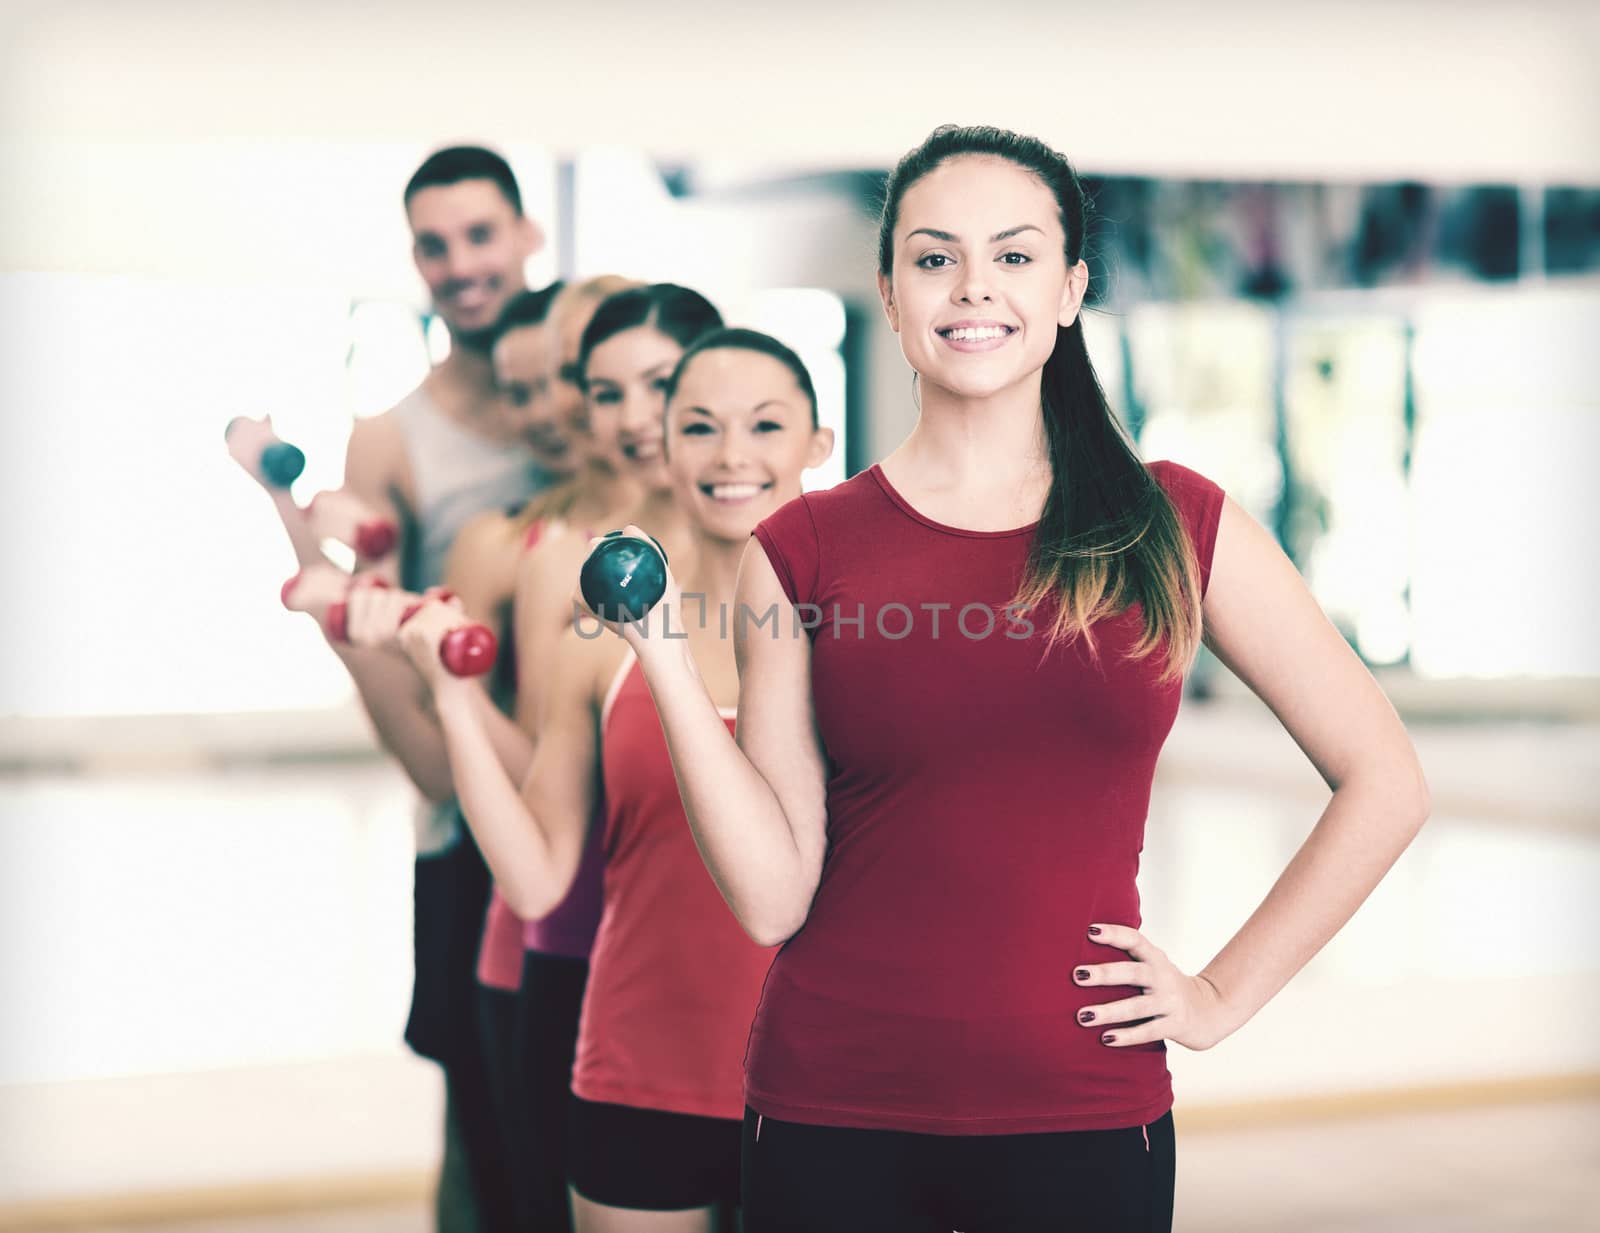 group of smiling people with dumbbells in the gym by dolgachov